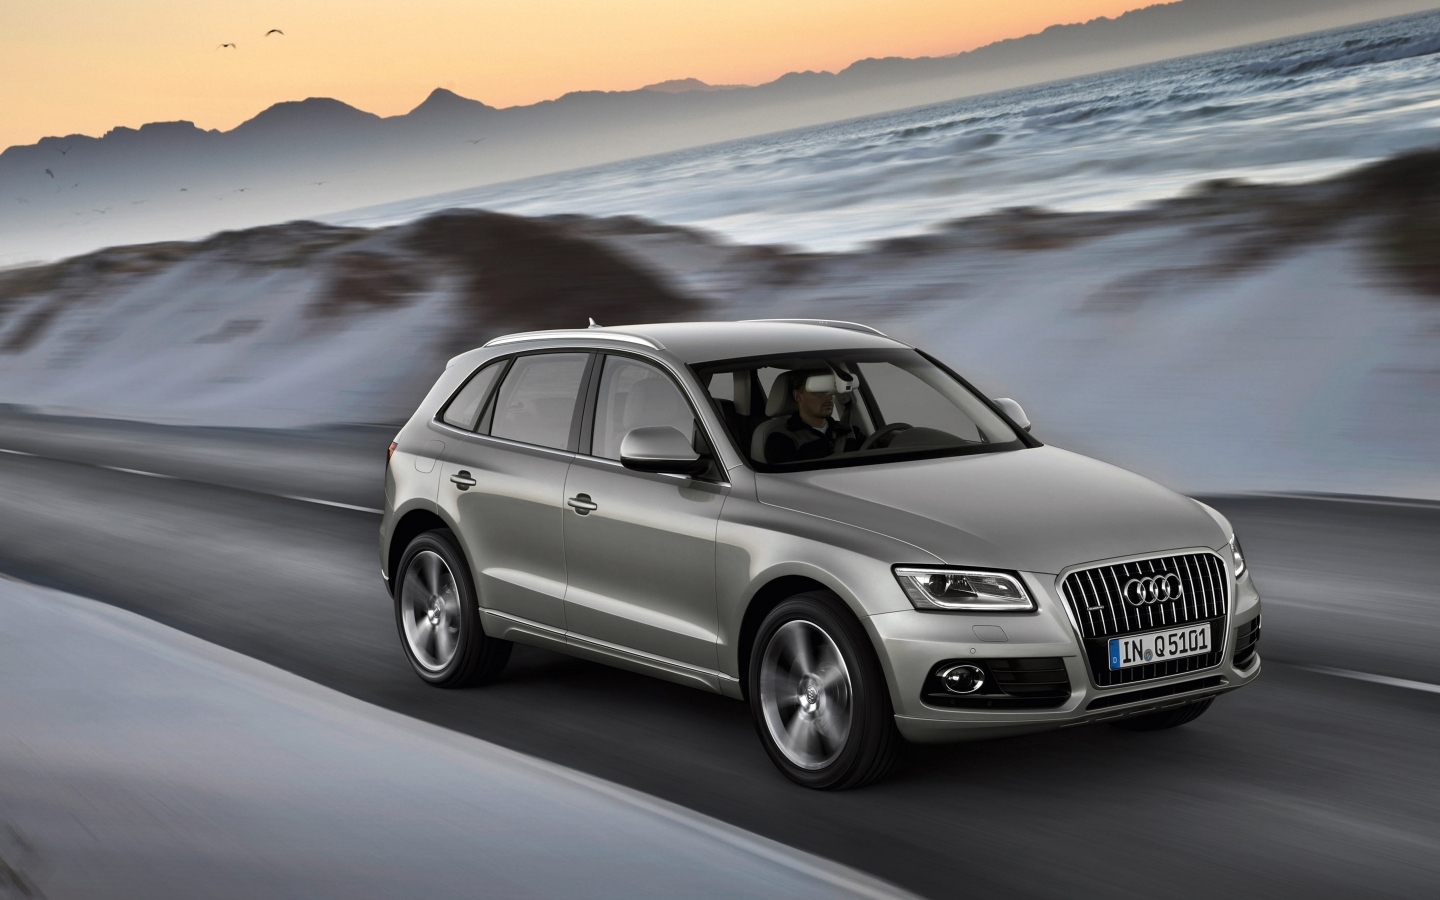 2013 Audi Q5 for 1440 x 900 widescreen resolution